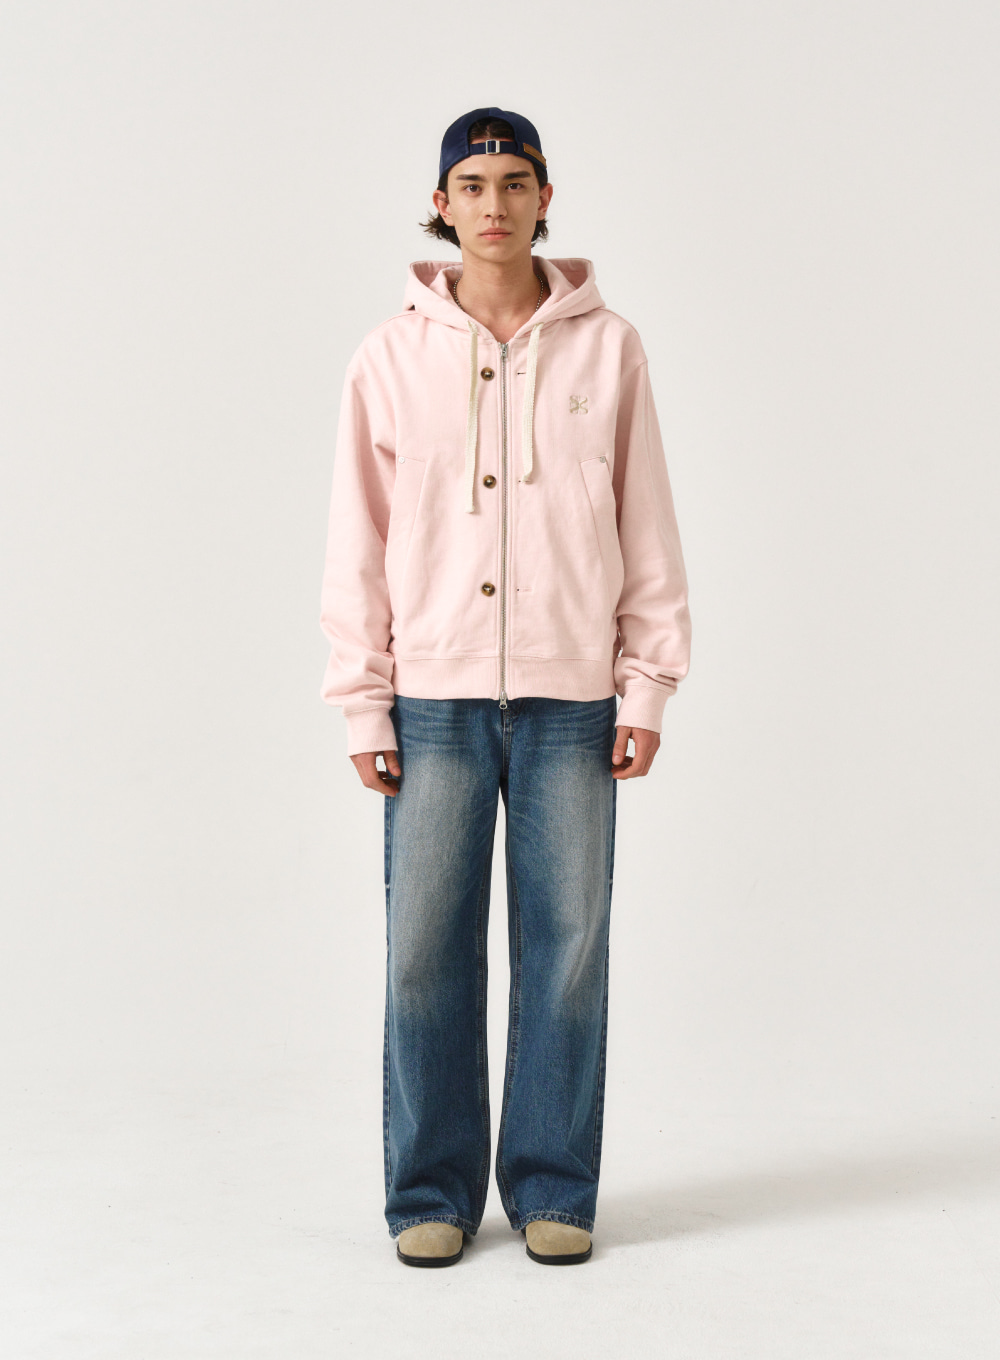 Teo Cotton All Day Hood Zip-Up - Pale Pink